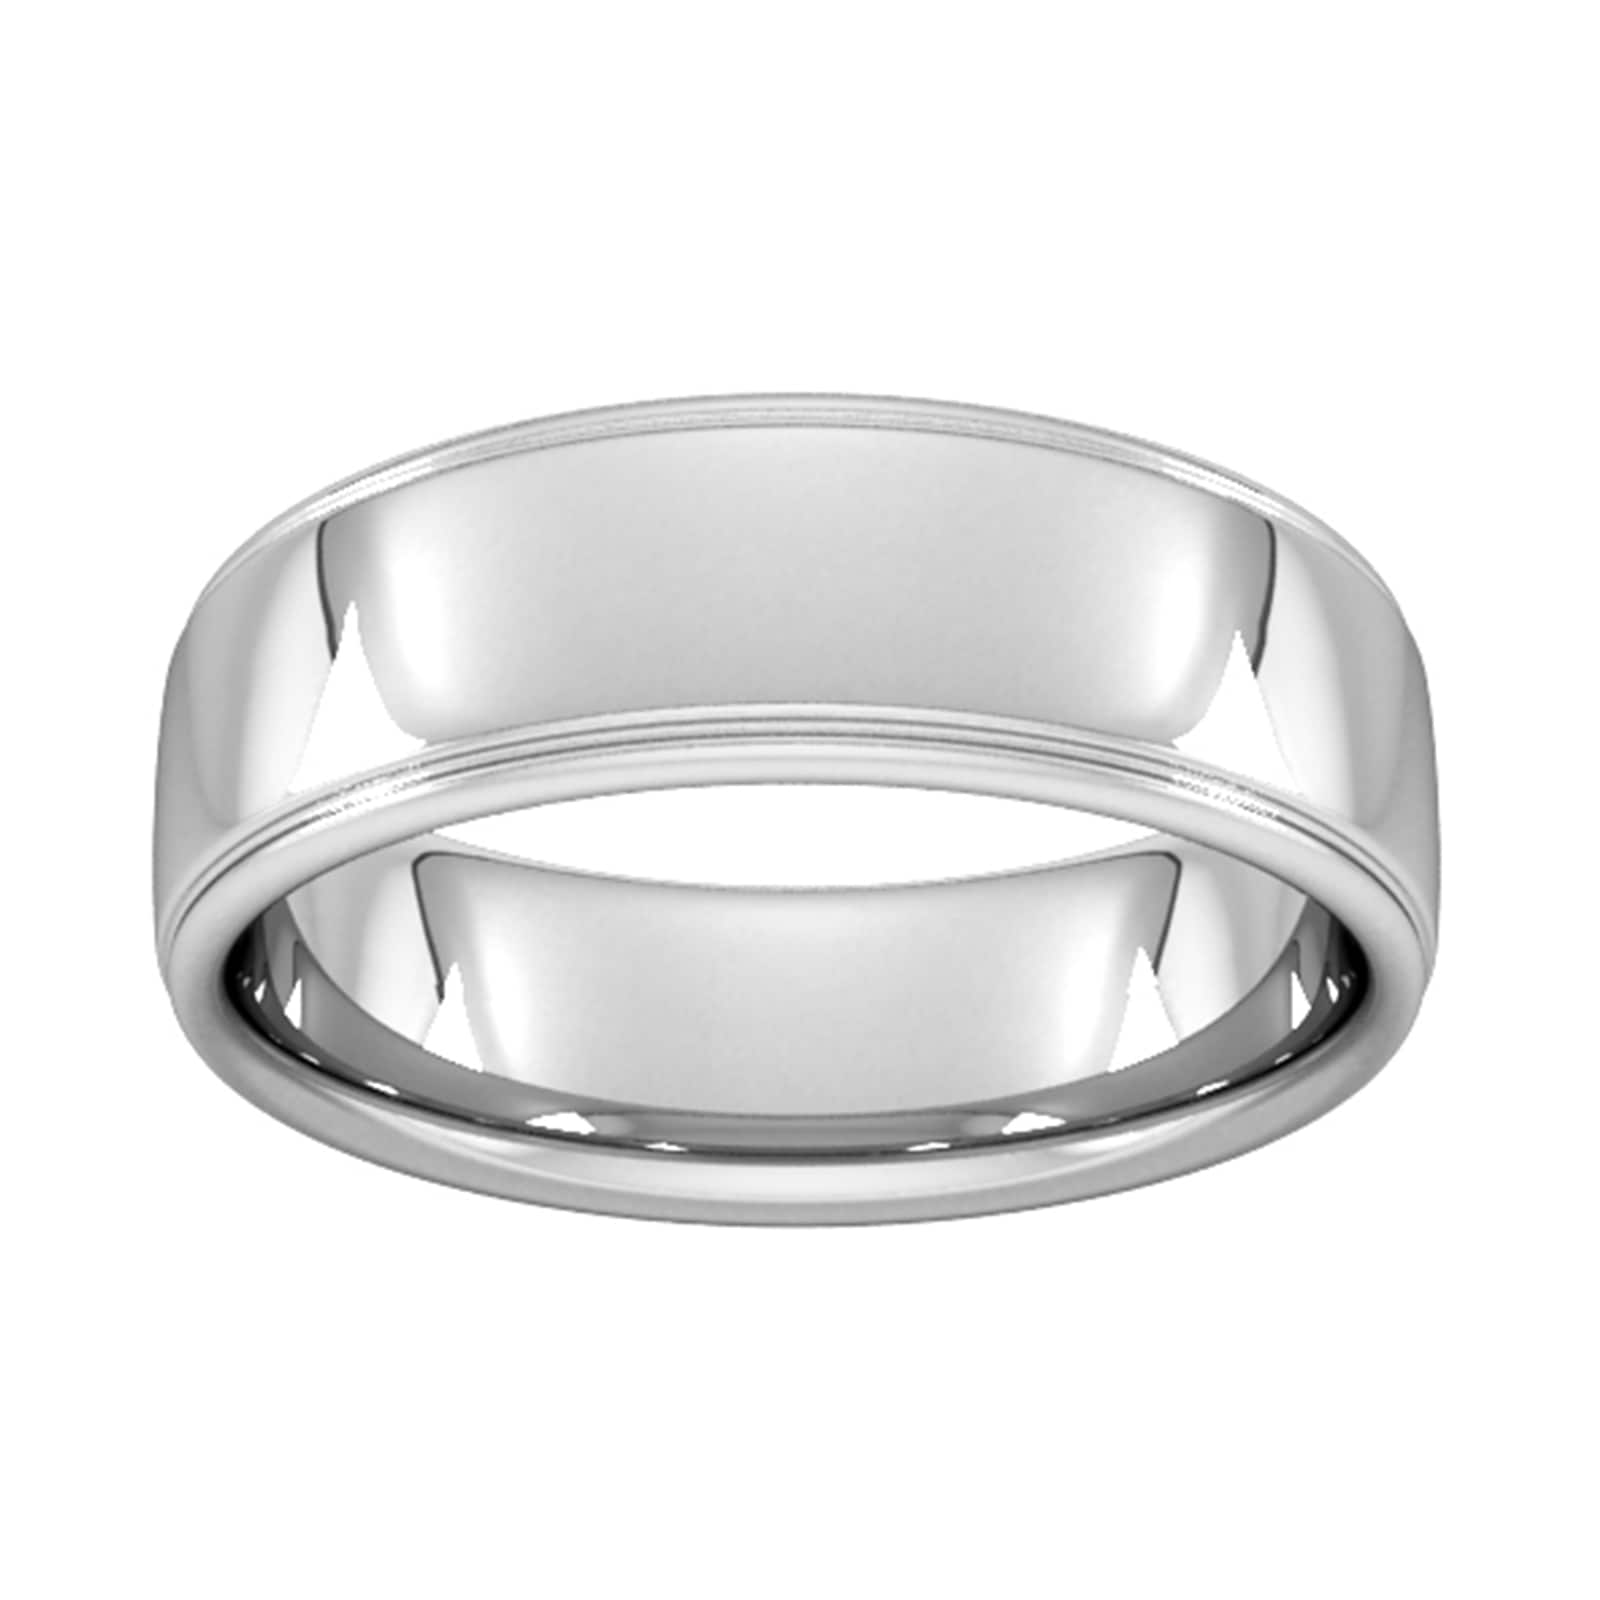 7mm D Shape Heavy Polished Finish With Grooves Wedding Ring In 950 Palladium - Ring Size R